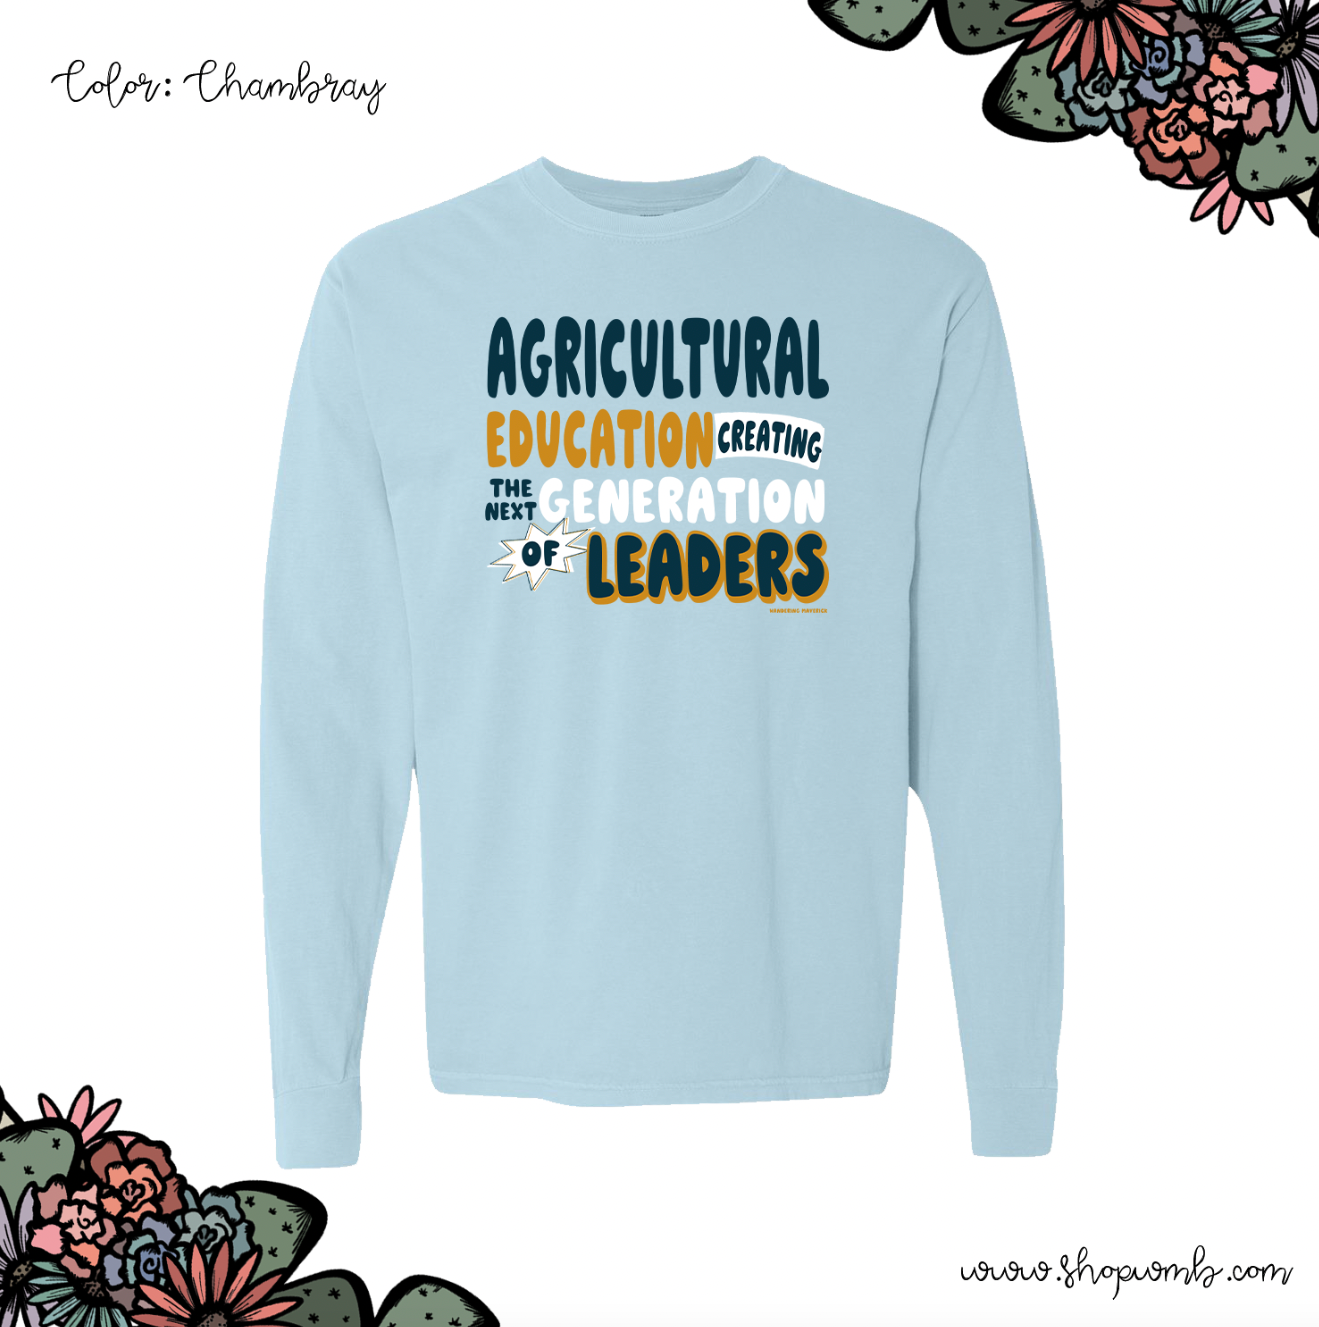 Agricultural Education Creating The Next Generation Of Leaders LONG SLEEVE T-Shirt (S-3XL) - Multiple Colors!